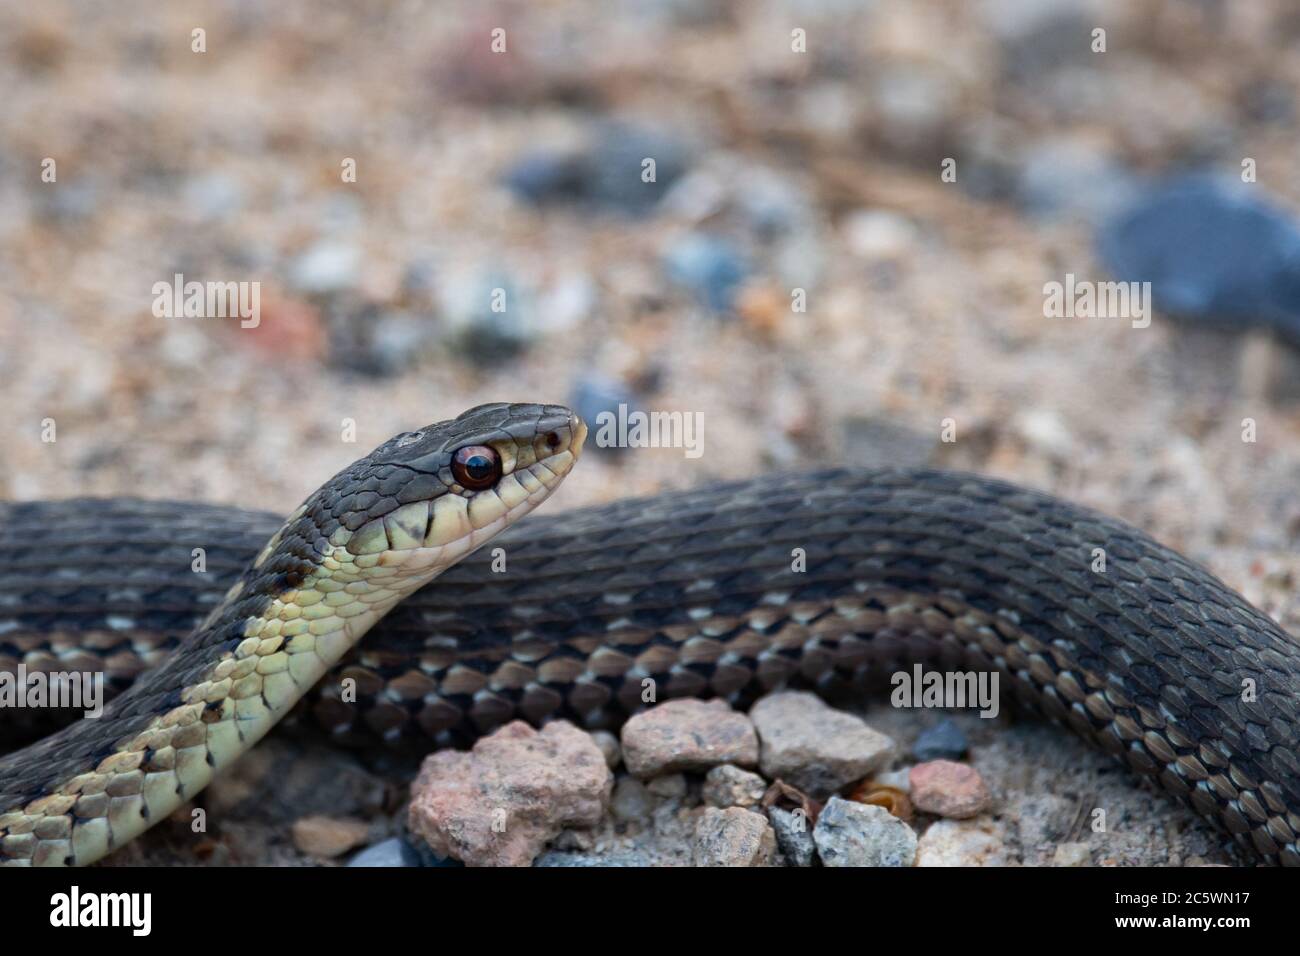 A common garter snake, Thamnophis sirtalis, on a gravel road in the Adirondack Wilderness. Stock Photo